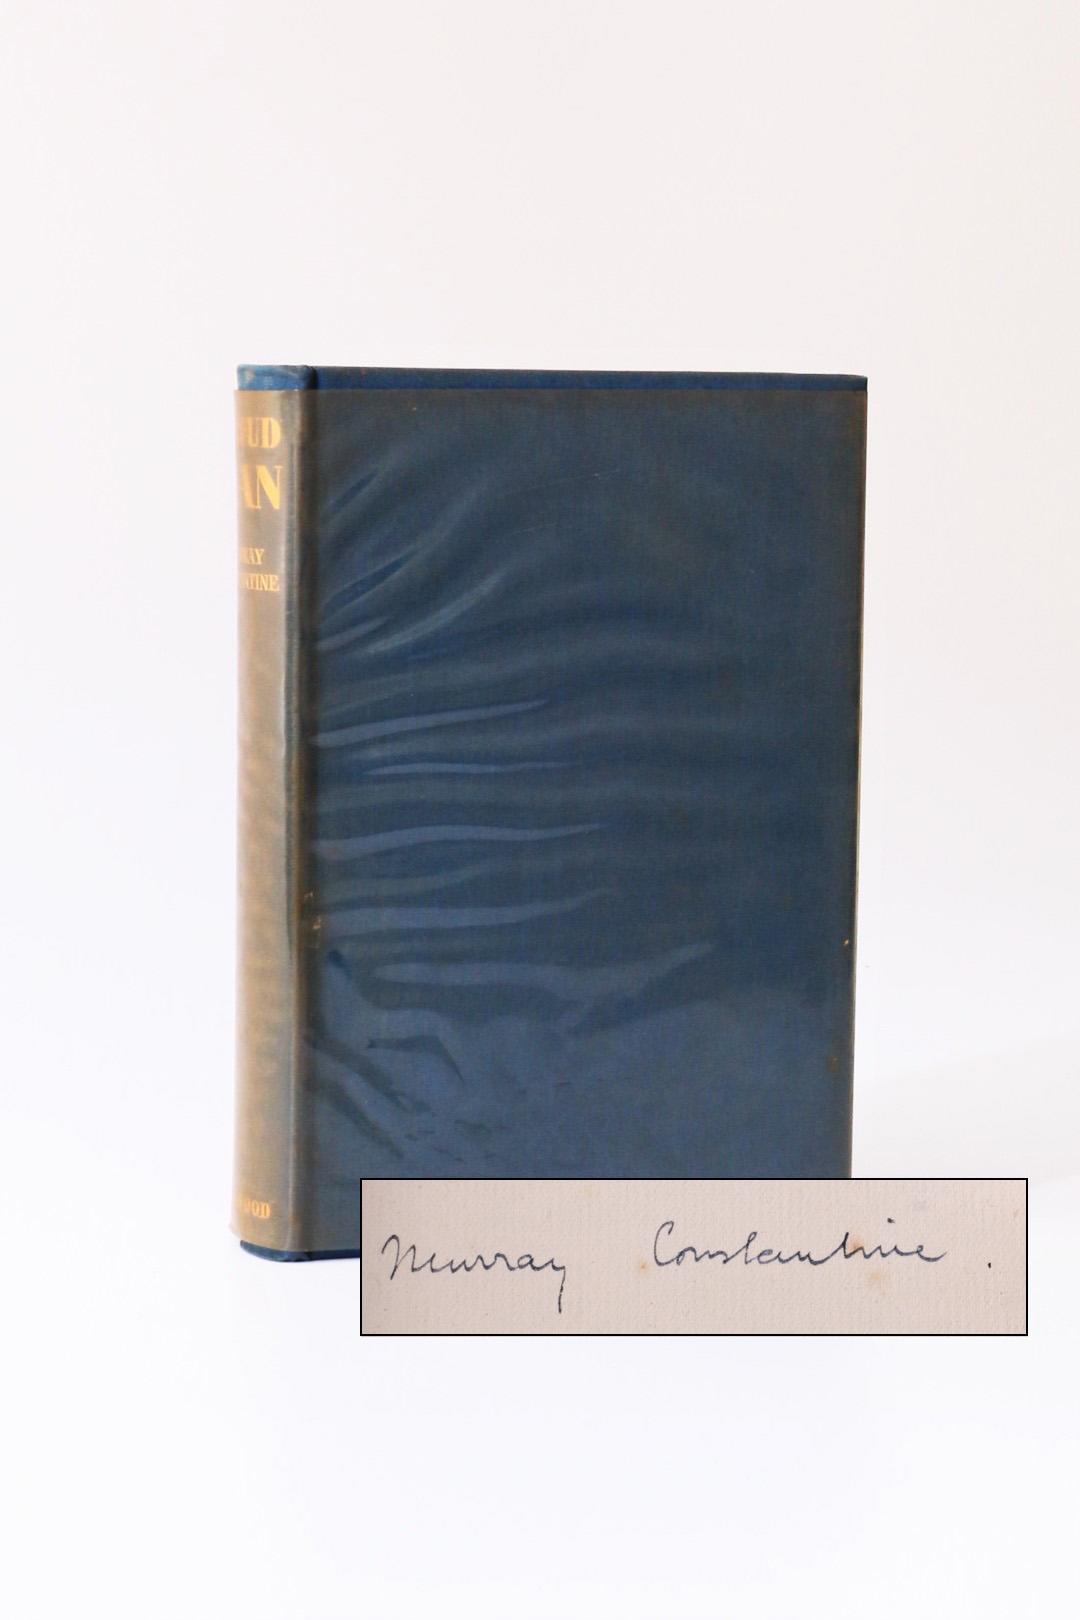 Murray Constantine - Proud Man - Presentation Copy - Boriswood, 1934, Signed Limited Edition.